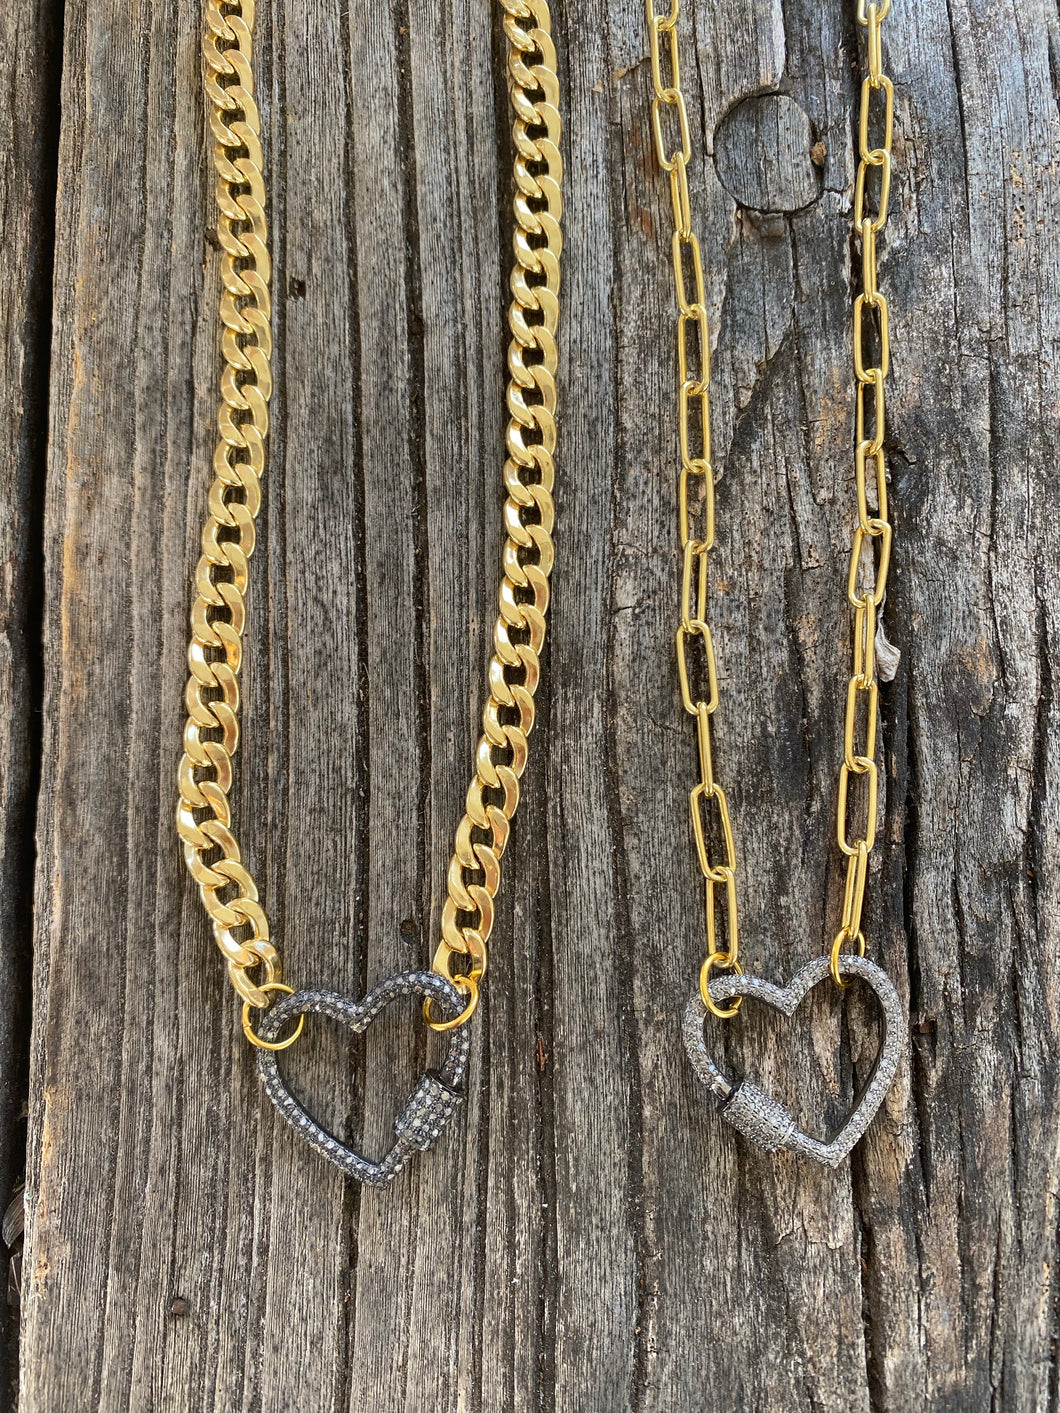 Sterling Silver then Gold Plated Necklace with Pave Diamond Heart Carabiner